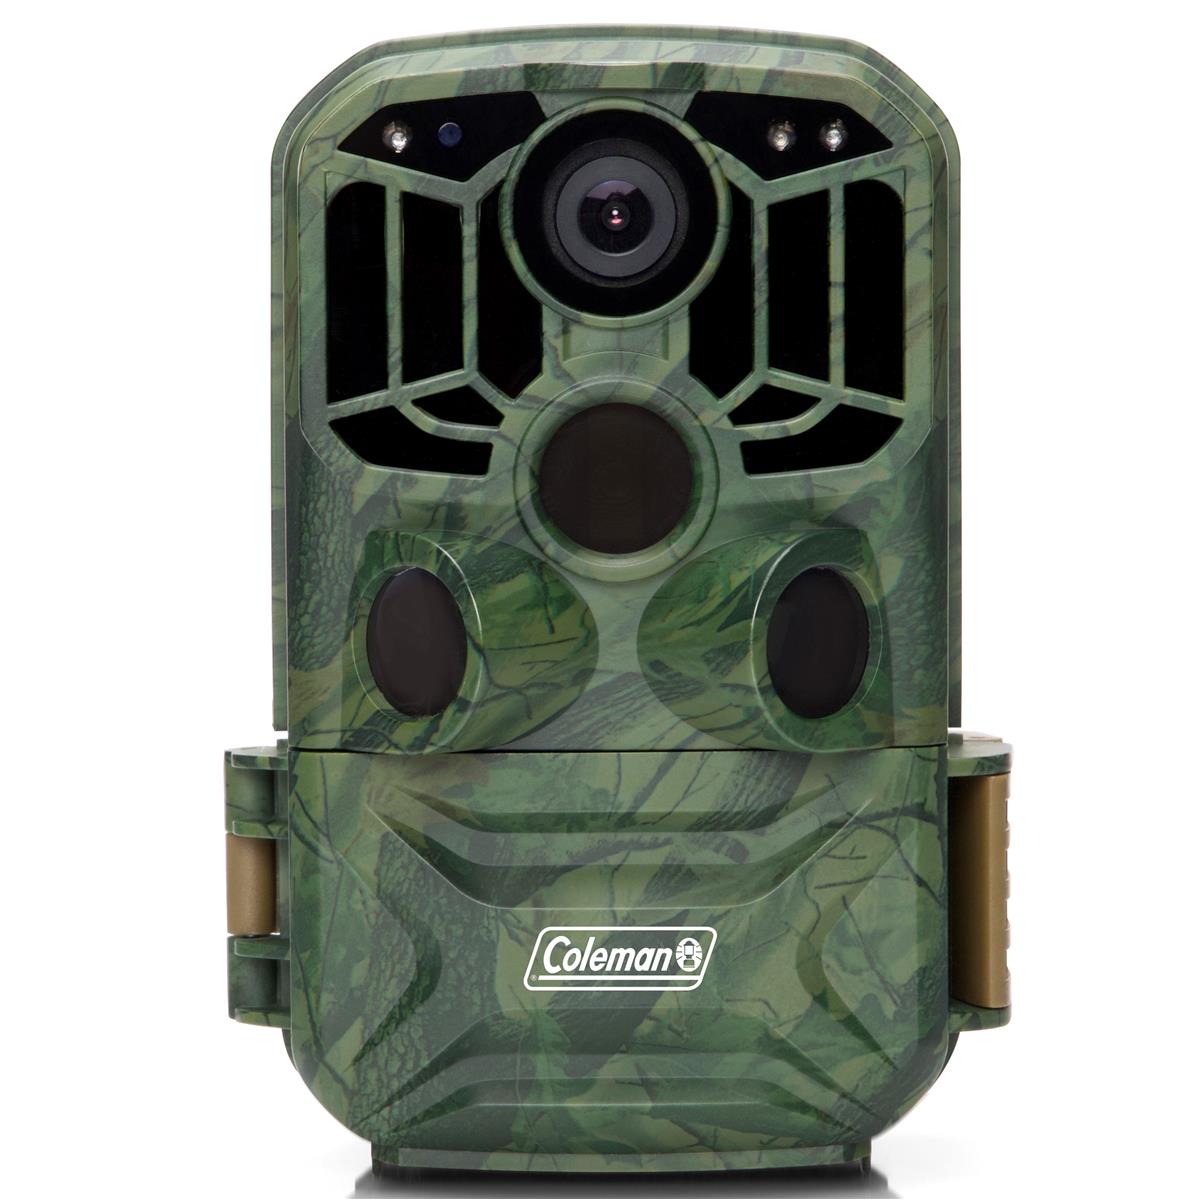 Image of Coleman XtremeTrail 24MP 1296p Waterproof Game/Hunting Camera with Wi-Fi